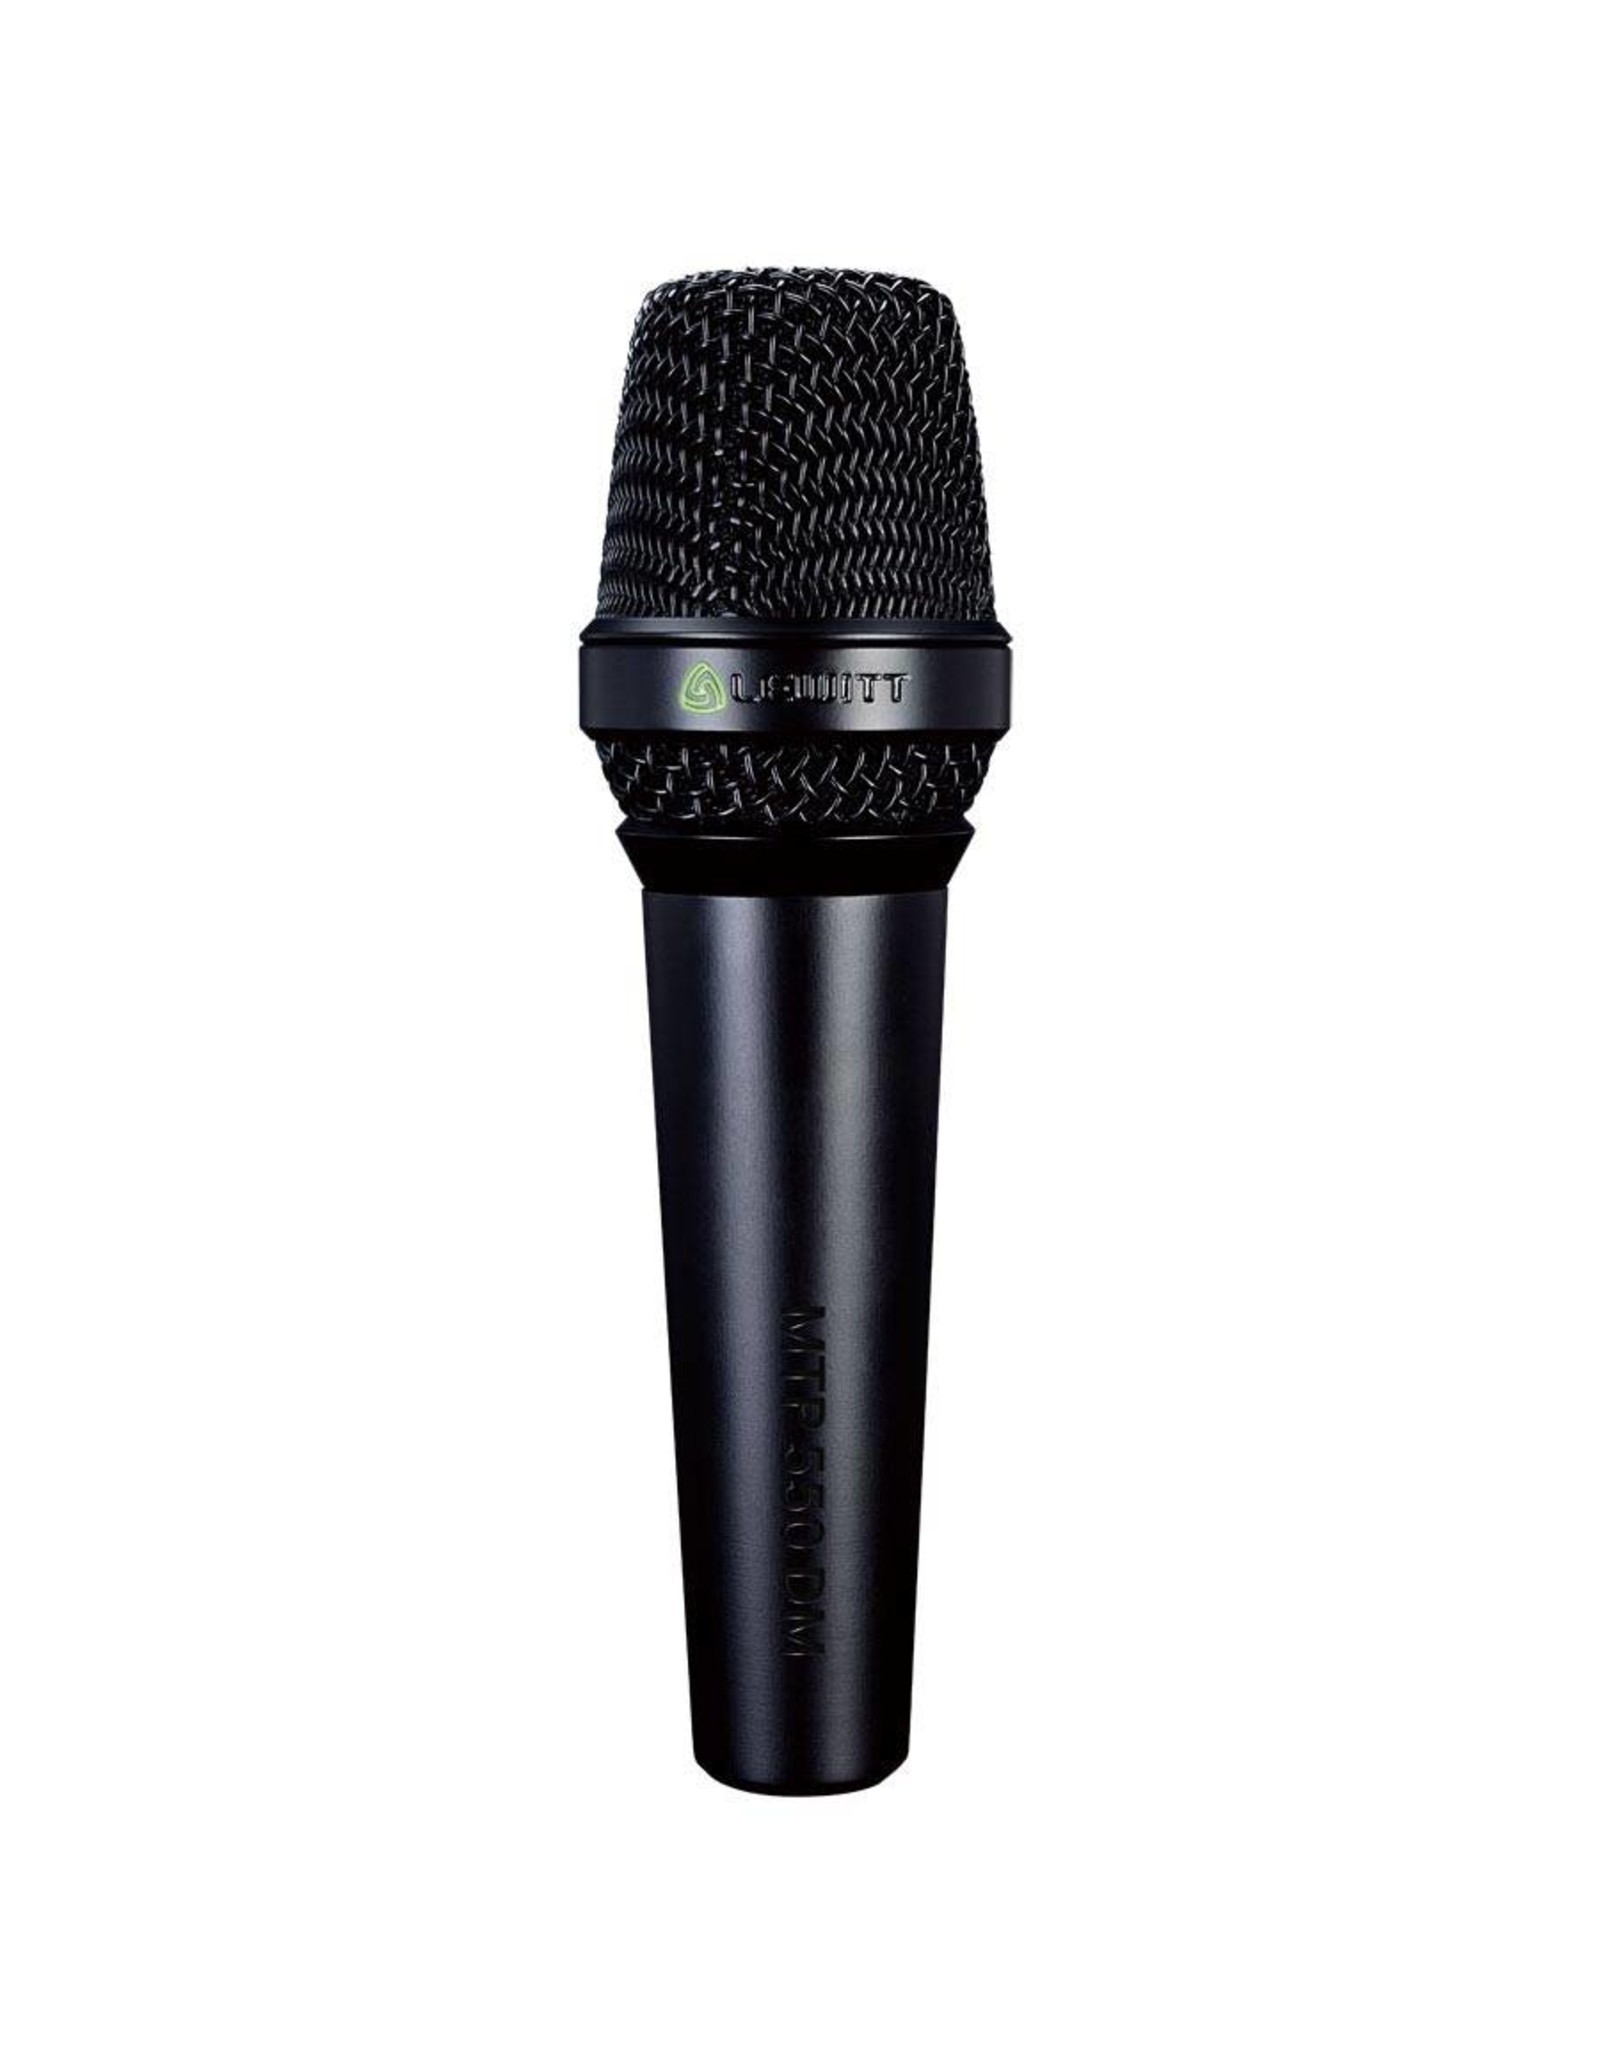 Lewitt MTP550DMS Vocal Microfoon with switch